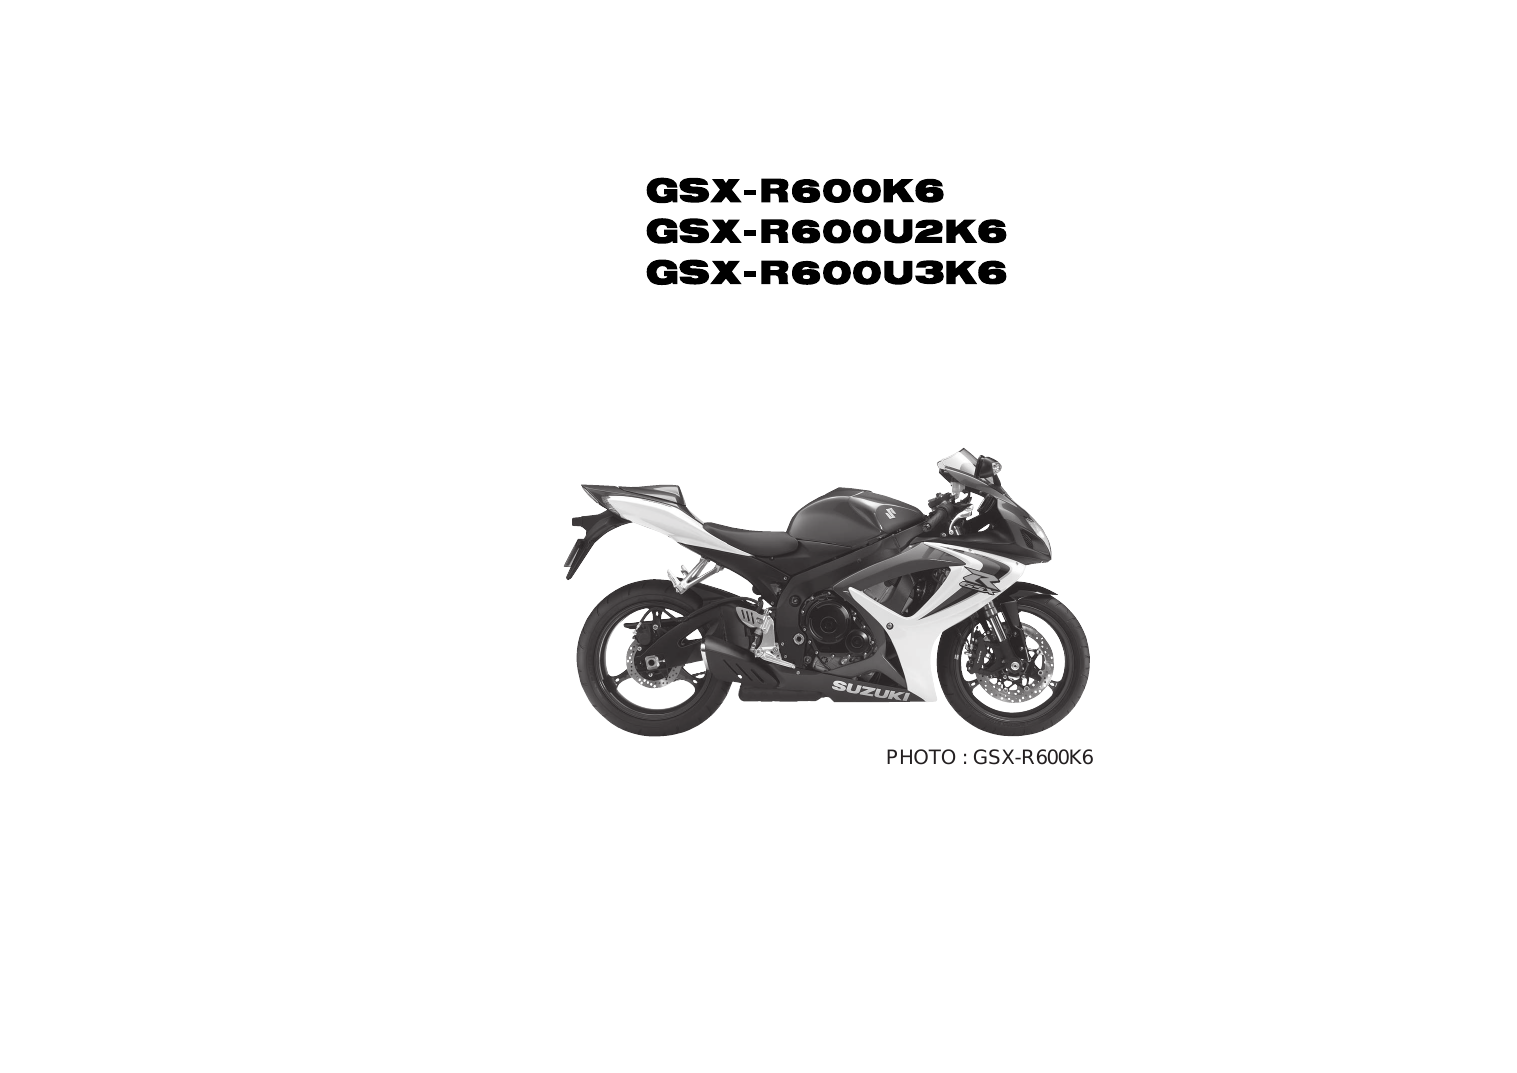 2006-2007 Suzuki GSX-R600 parts and service manual Preview image 4